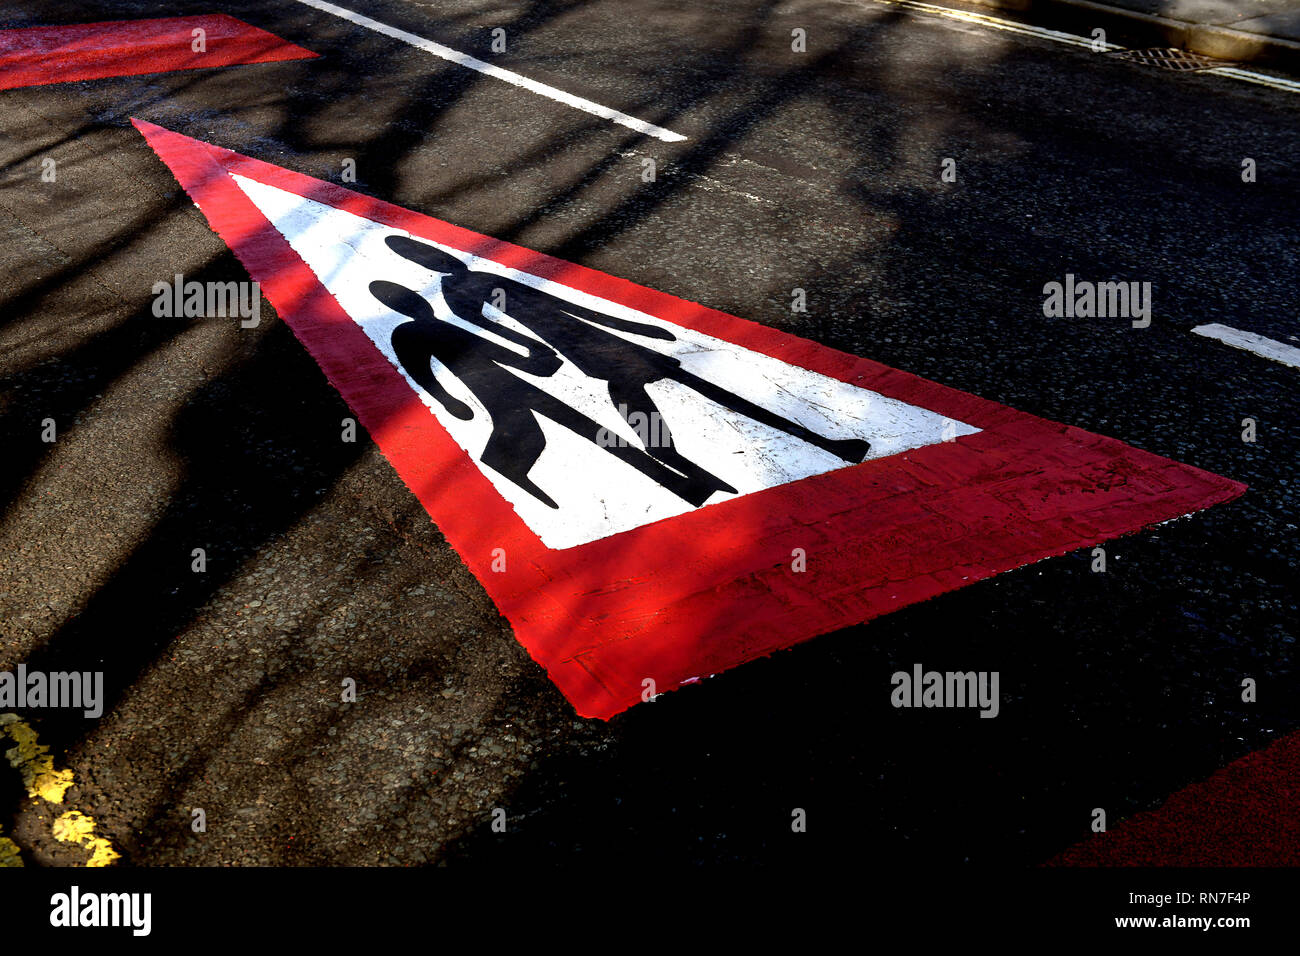 School zone childrens road safety marking sign for motorists Stock Photo